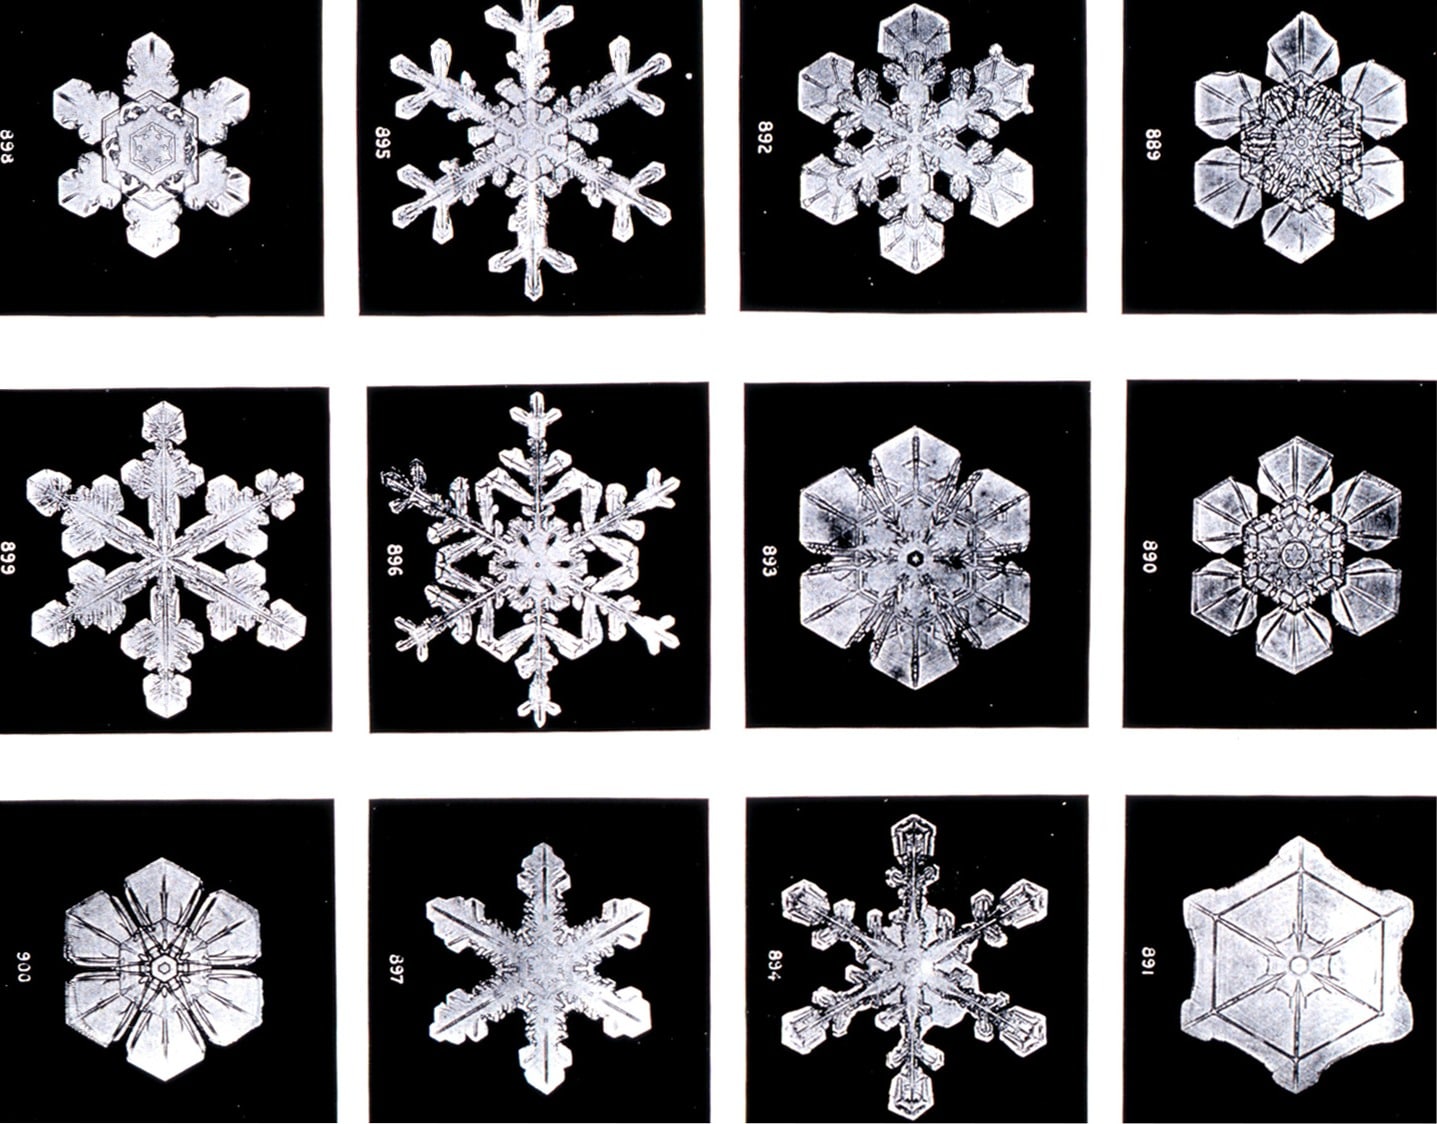 Snowflake Cookies - Using stencil ornaments, any decorated cookie can be turned into a work of art. simplysated